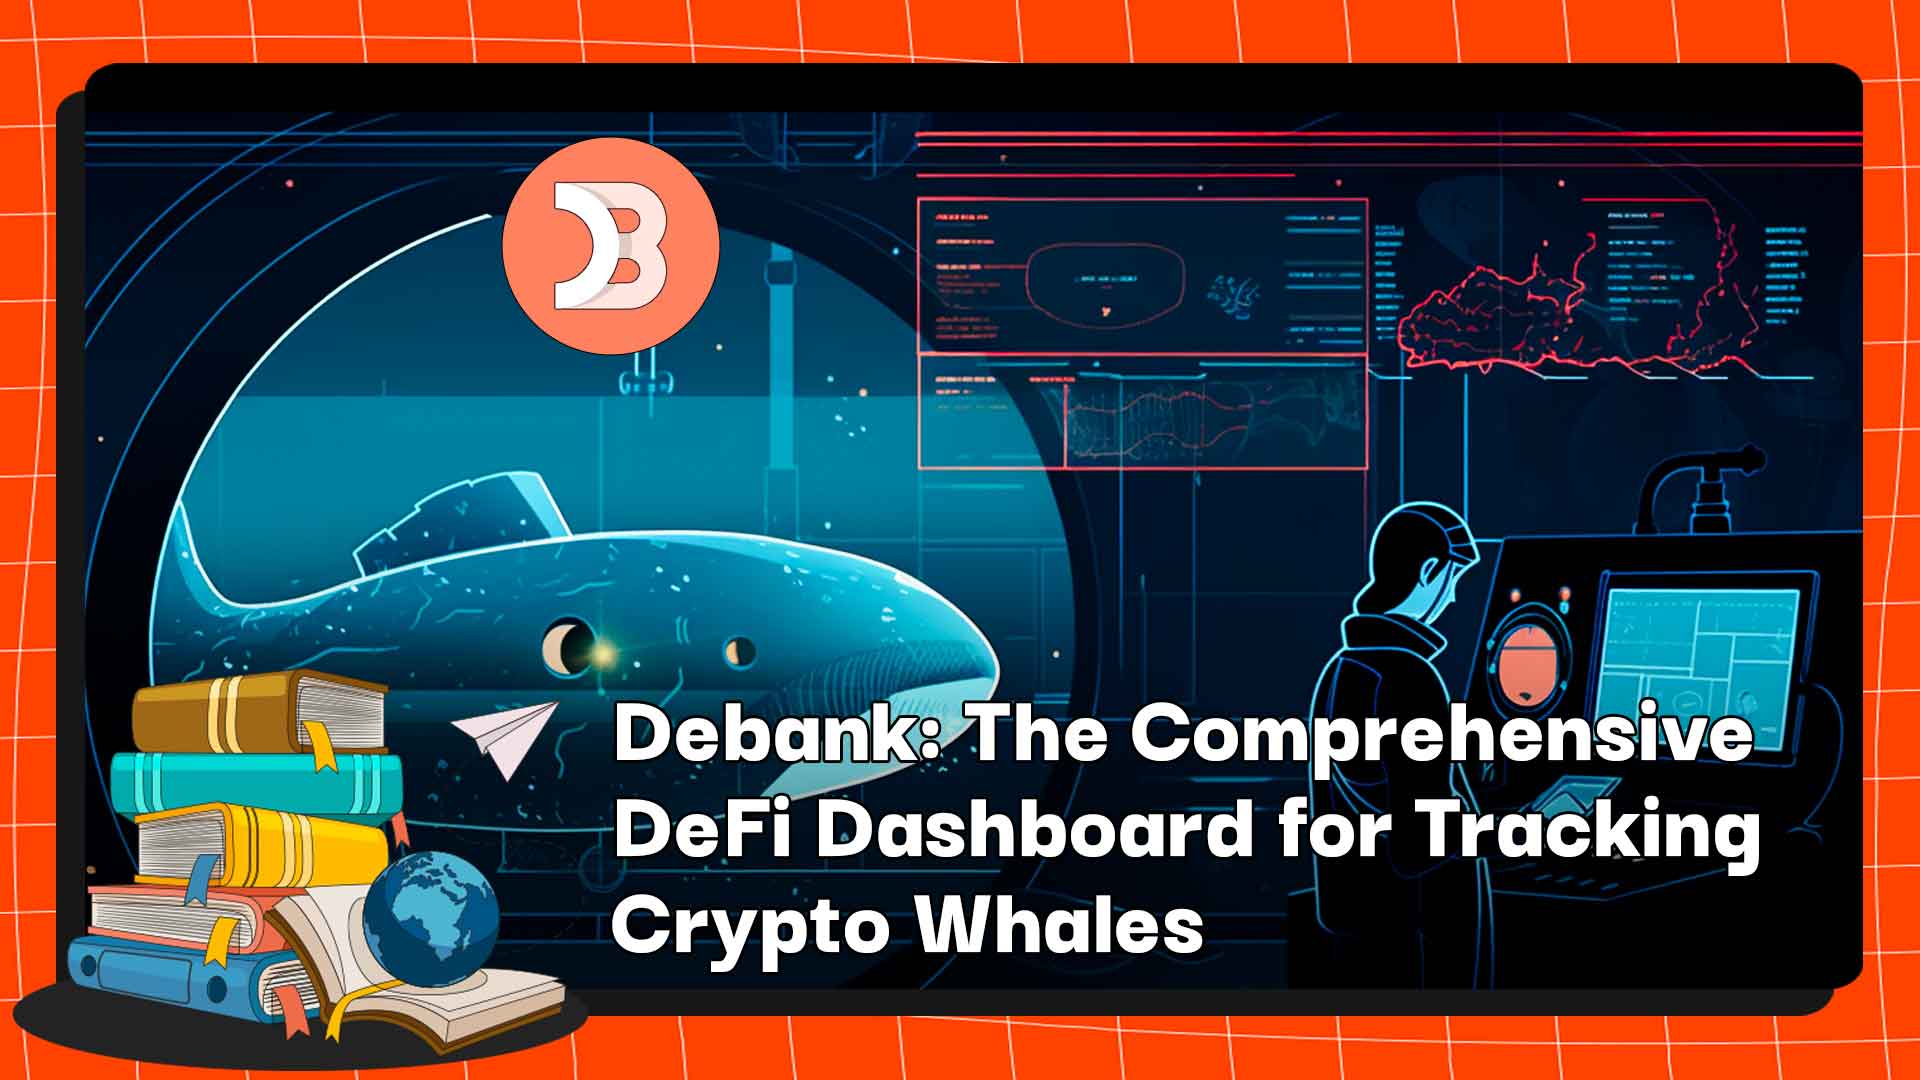 Detailed step-by-step instructions for using Debank, from creating an account to using Debank to follow whale footprints.